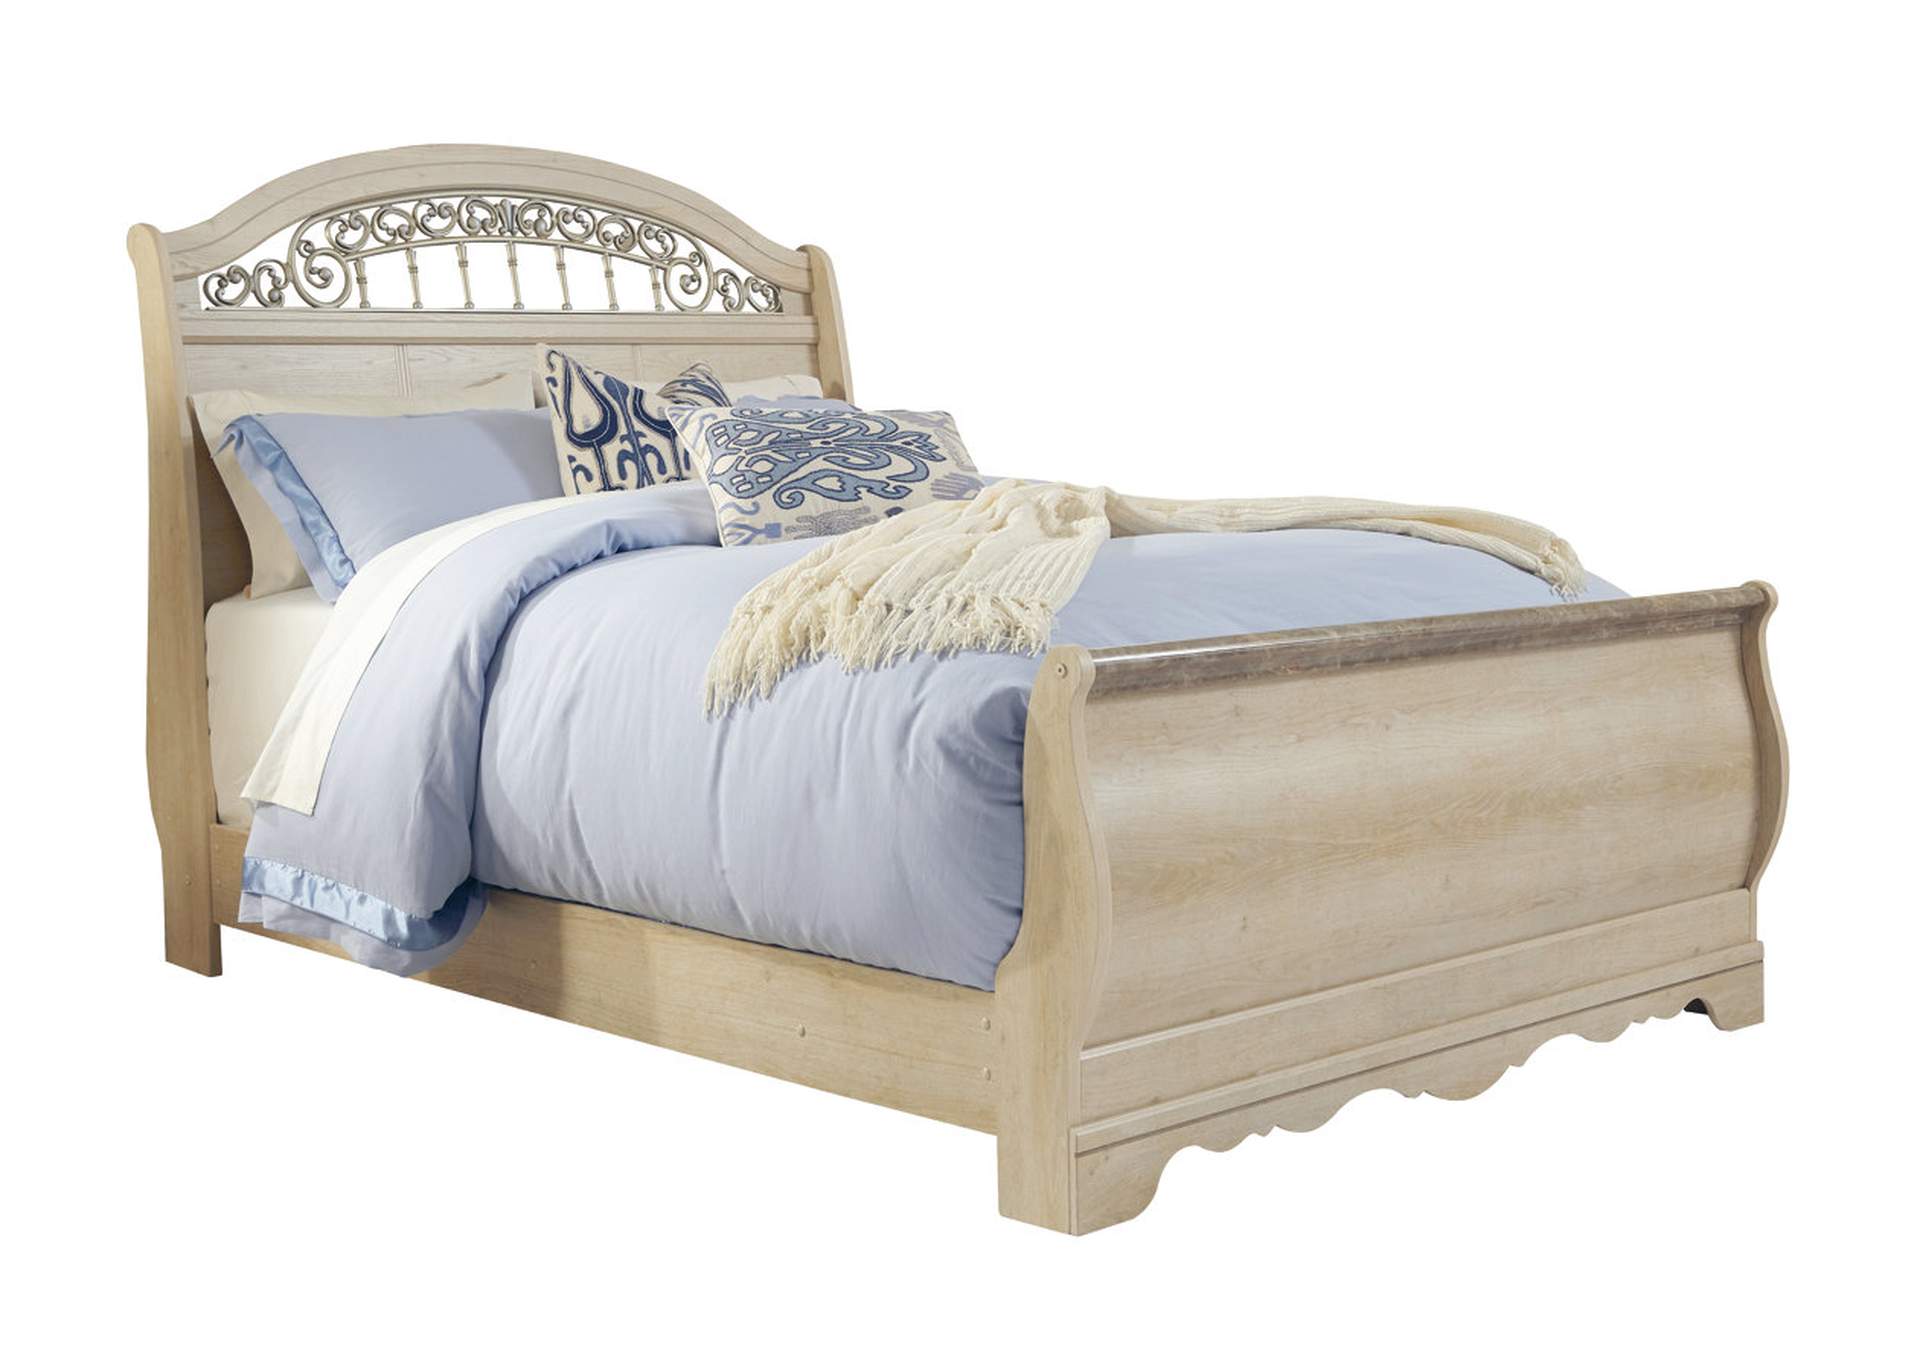 Catalina Queen Sleigh Bed Ashley Furniture Homestore Independently Owned And Operated By Best Furn Appliances I